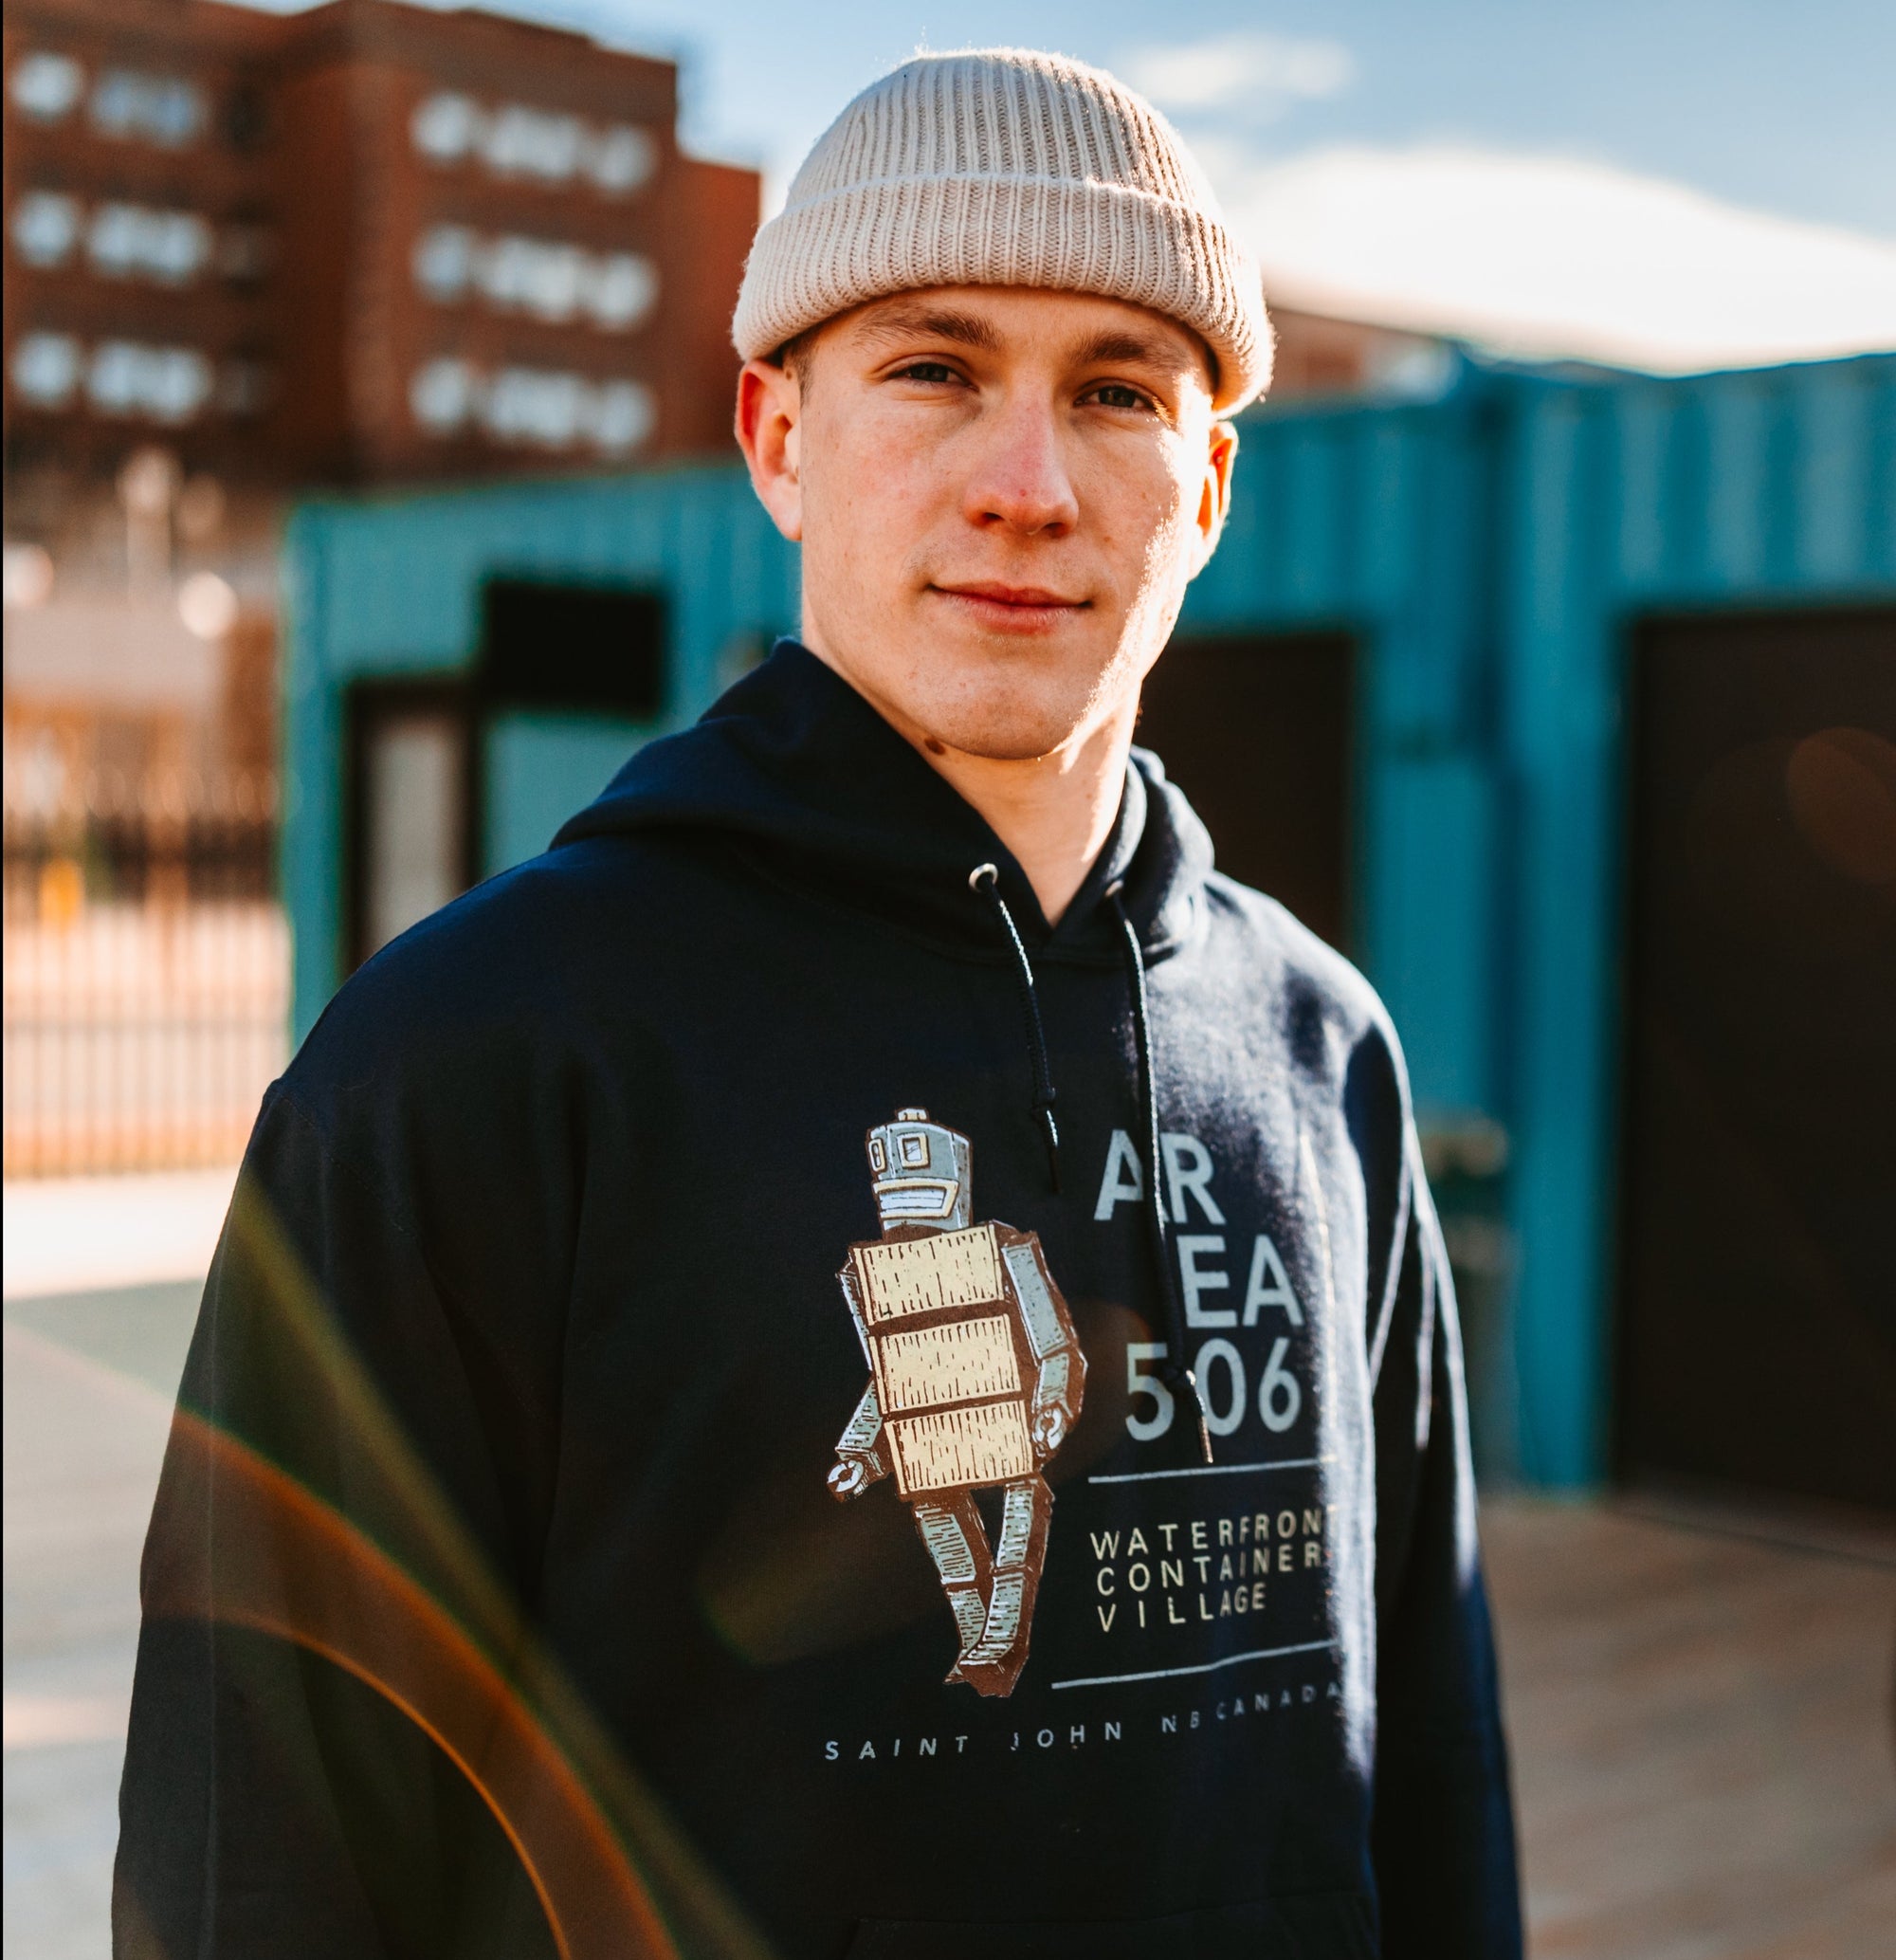 Navy blue pullover hoodie with the Robot Mascot and AREA 506 Waterfront Container Village, Saint John NB Canada text on the front.